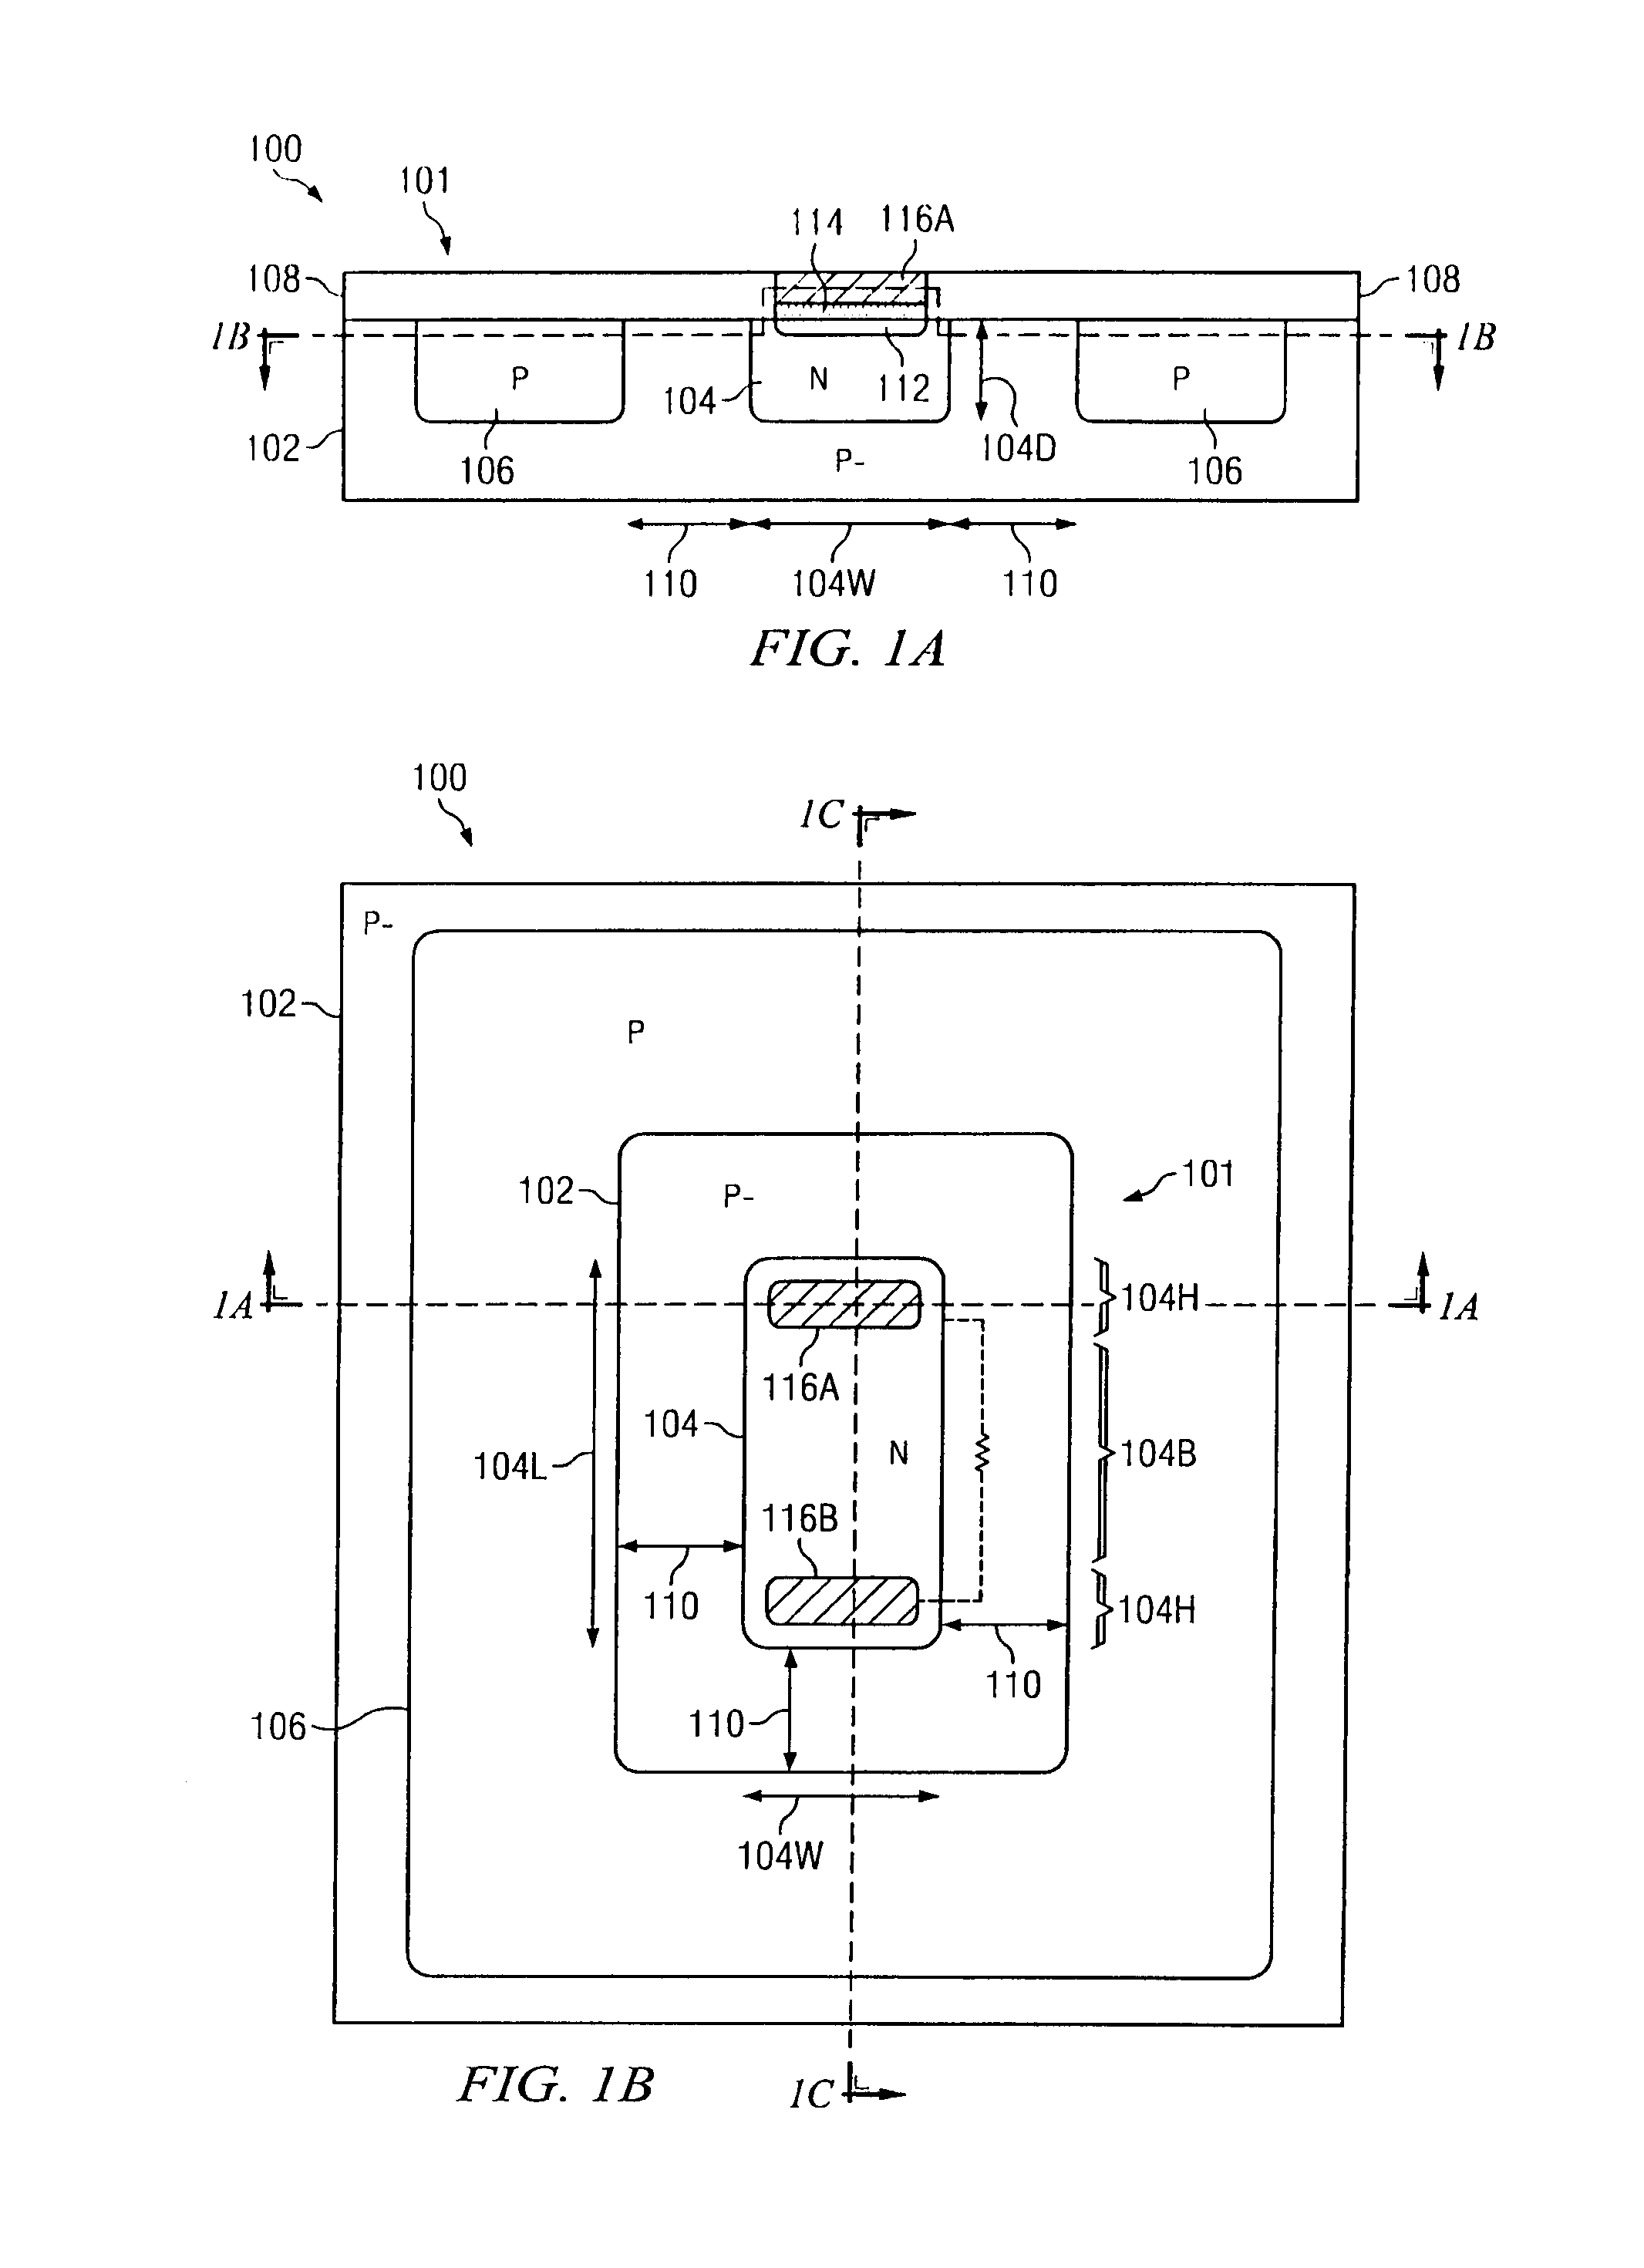 Diffusion resistor with reduced voltage coefficient of resistance and increased breakdown voltage using CMOS wells